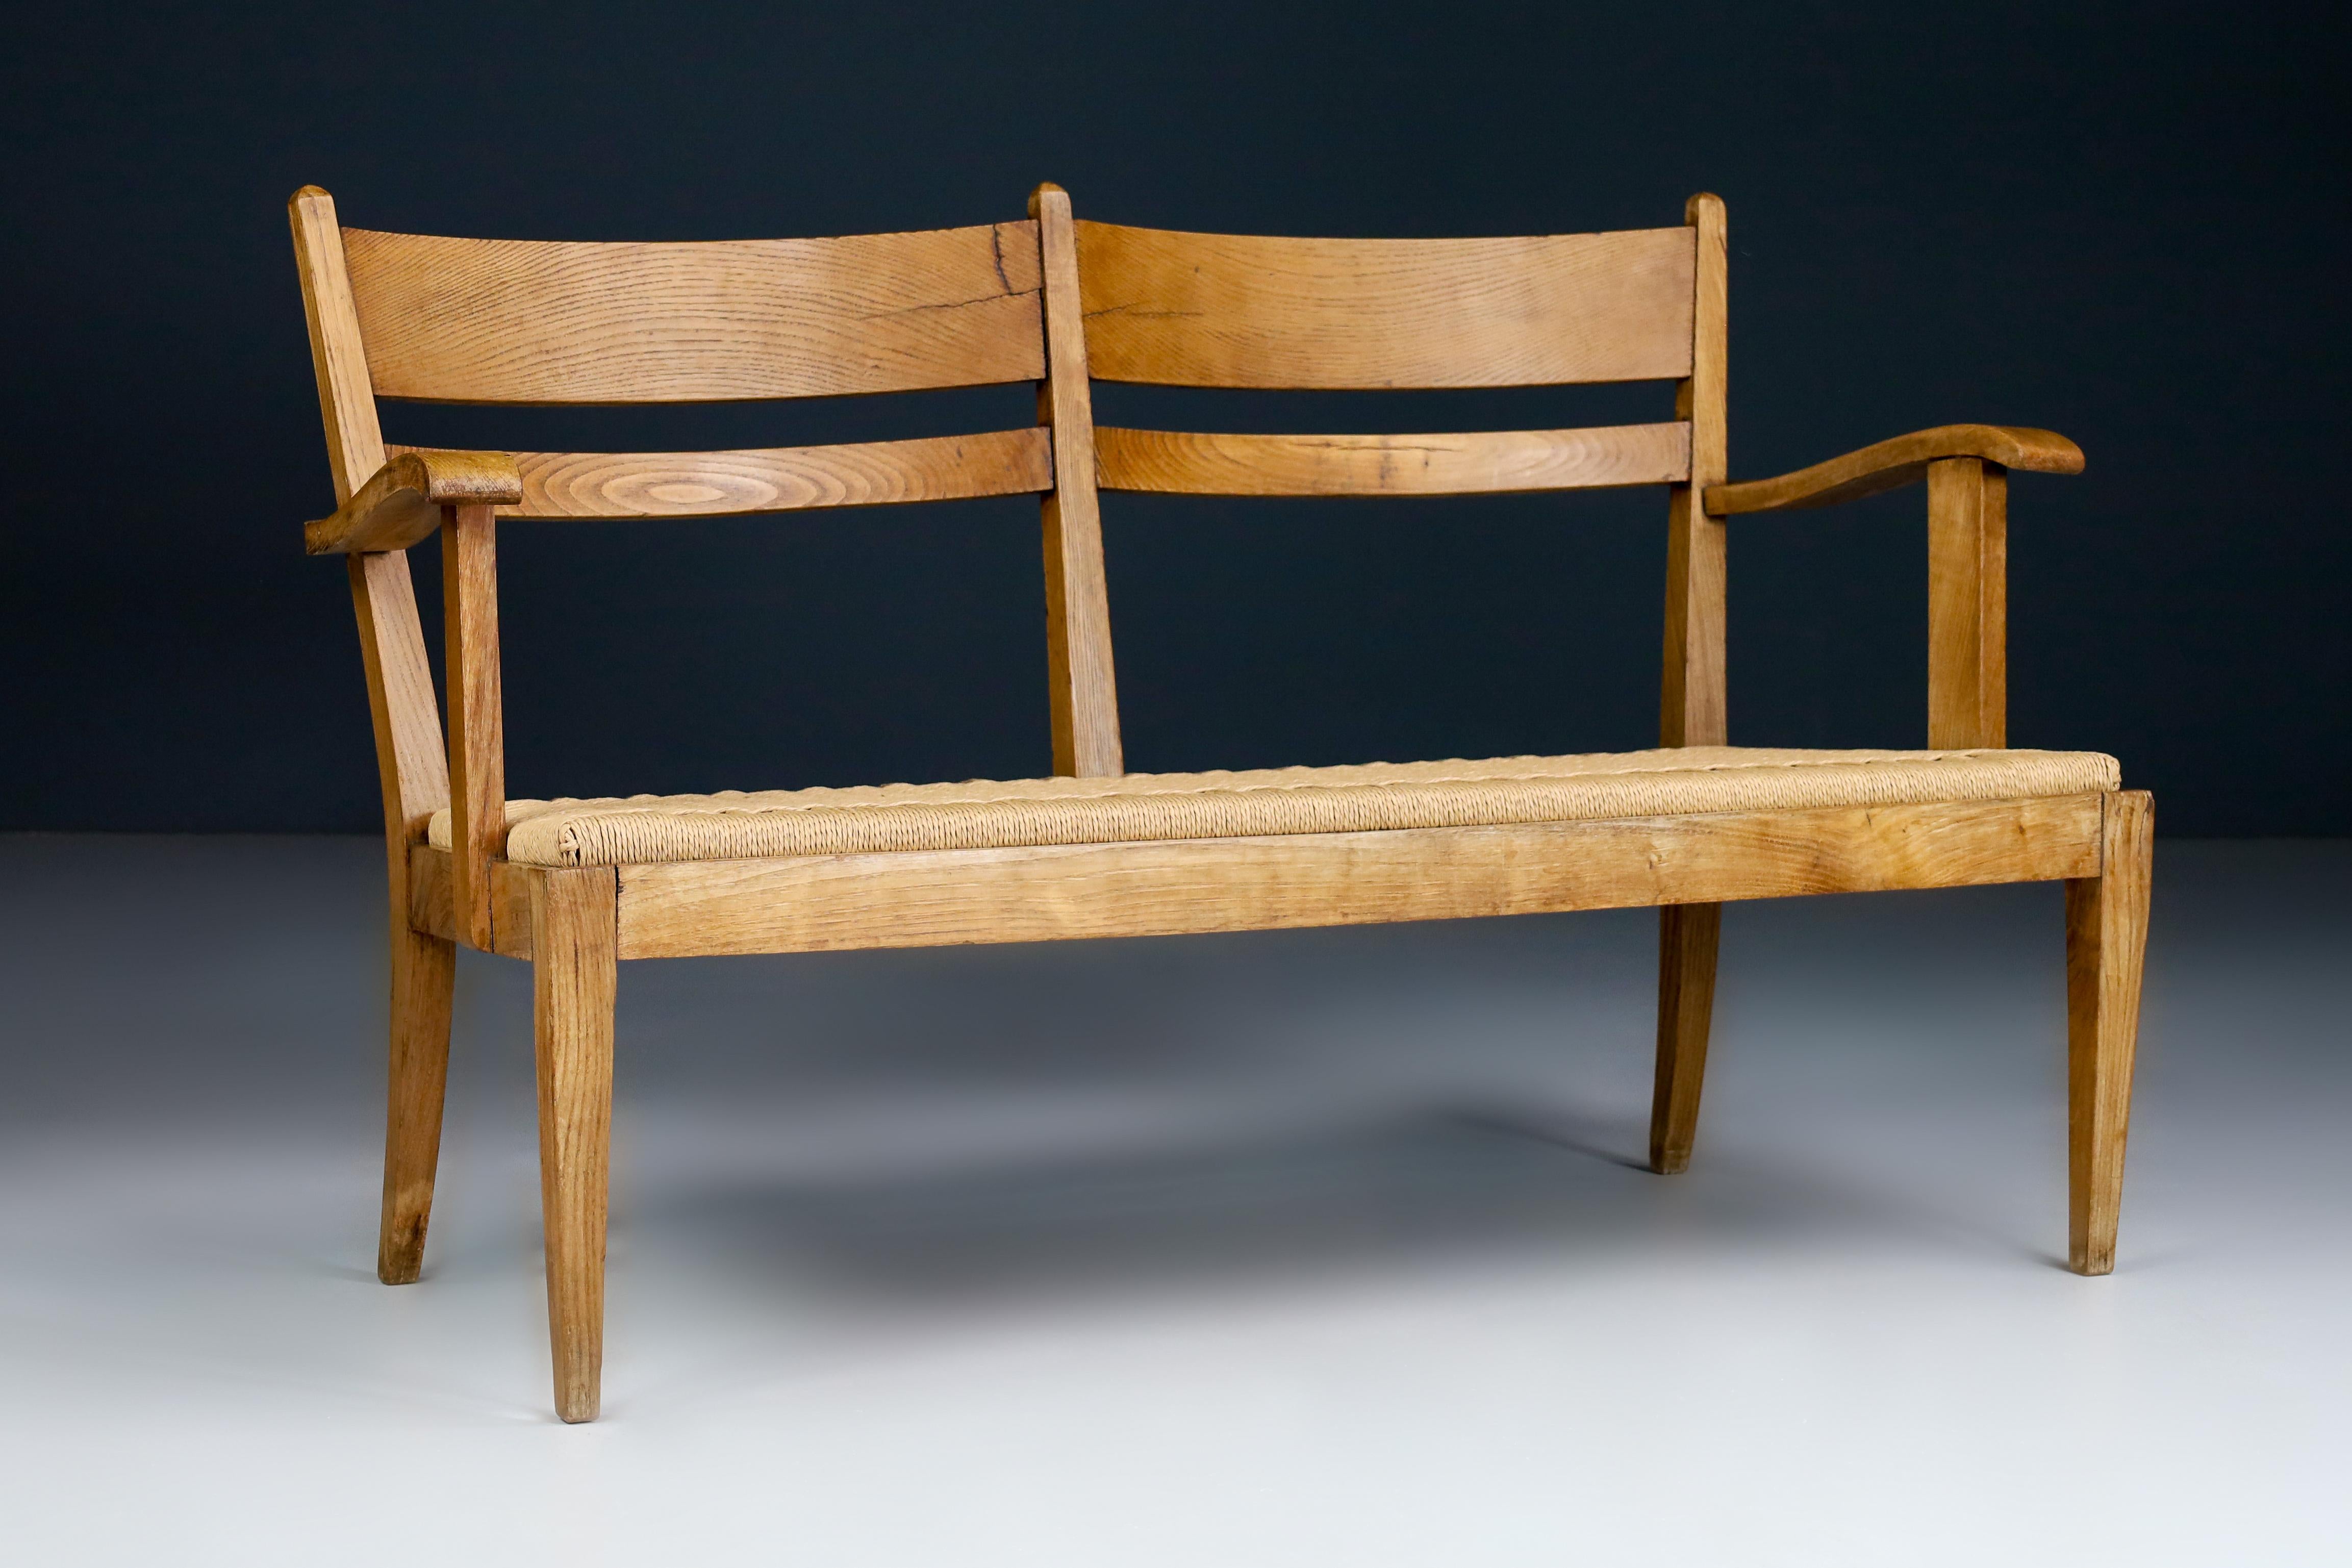 Sculptural rope and oak settee or bench, France 1950s

Sculptural settee or bench executed in rope and solid oak and made and designed in France in the 50s. Rustic yet elegant due to the sleek tapered legs that reveal a certain level of